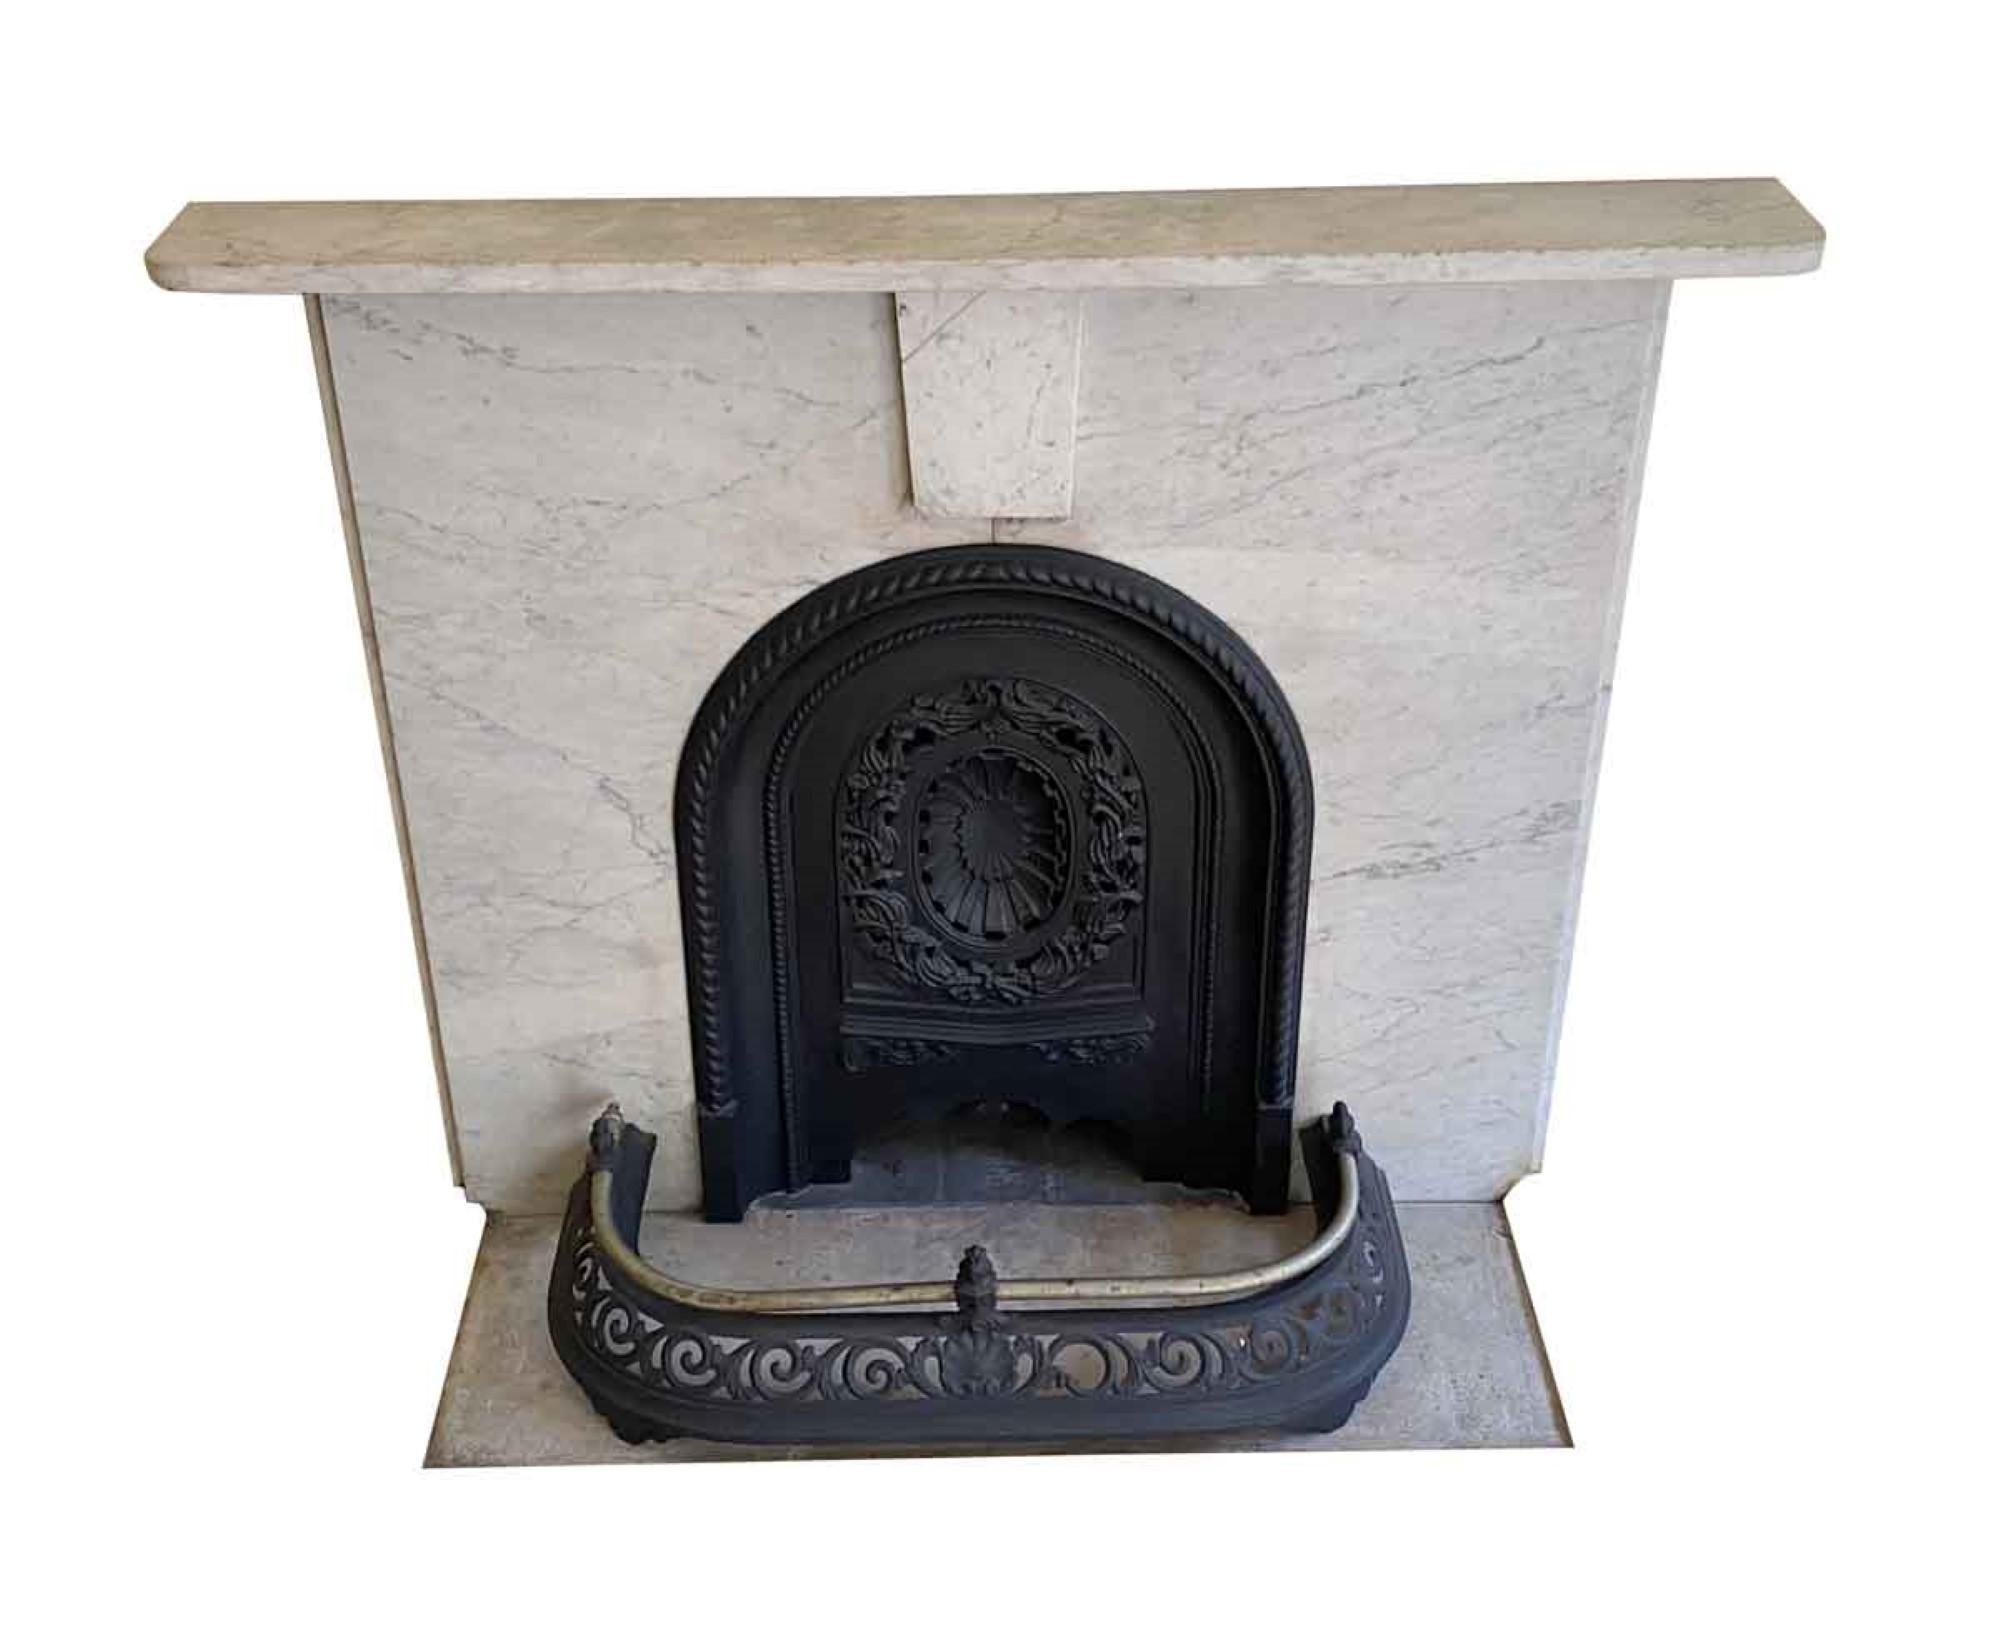 This very simple and petite 19th century Victorian Carrara marble mantel is from a NYC townhouse. It comes with the complete original cast iron summer cover surround and insert. The original keystone was cracked and mended as seen in pictures. This